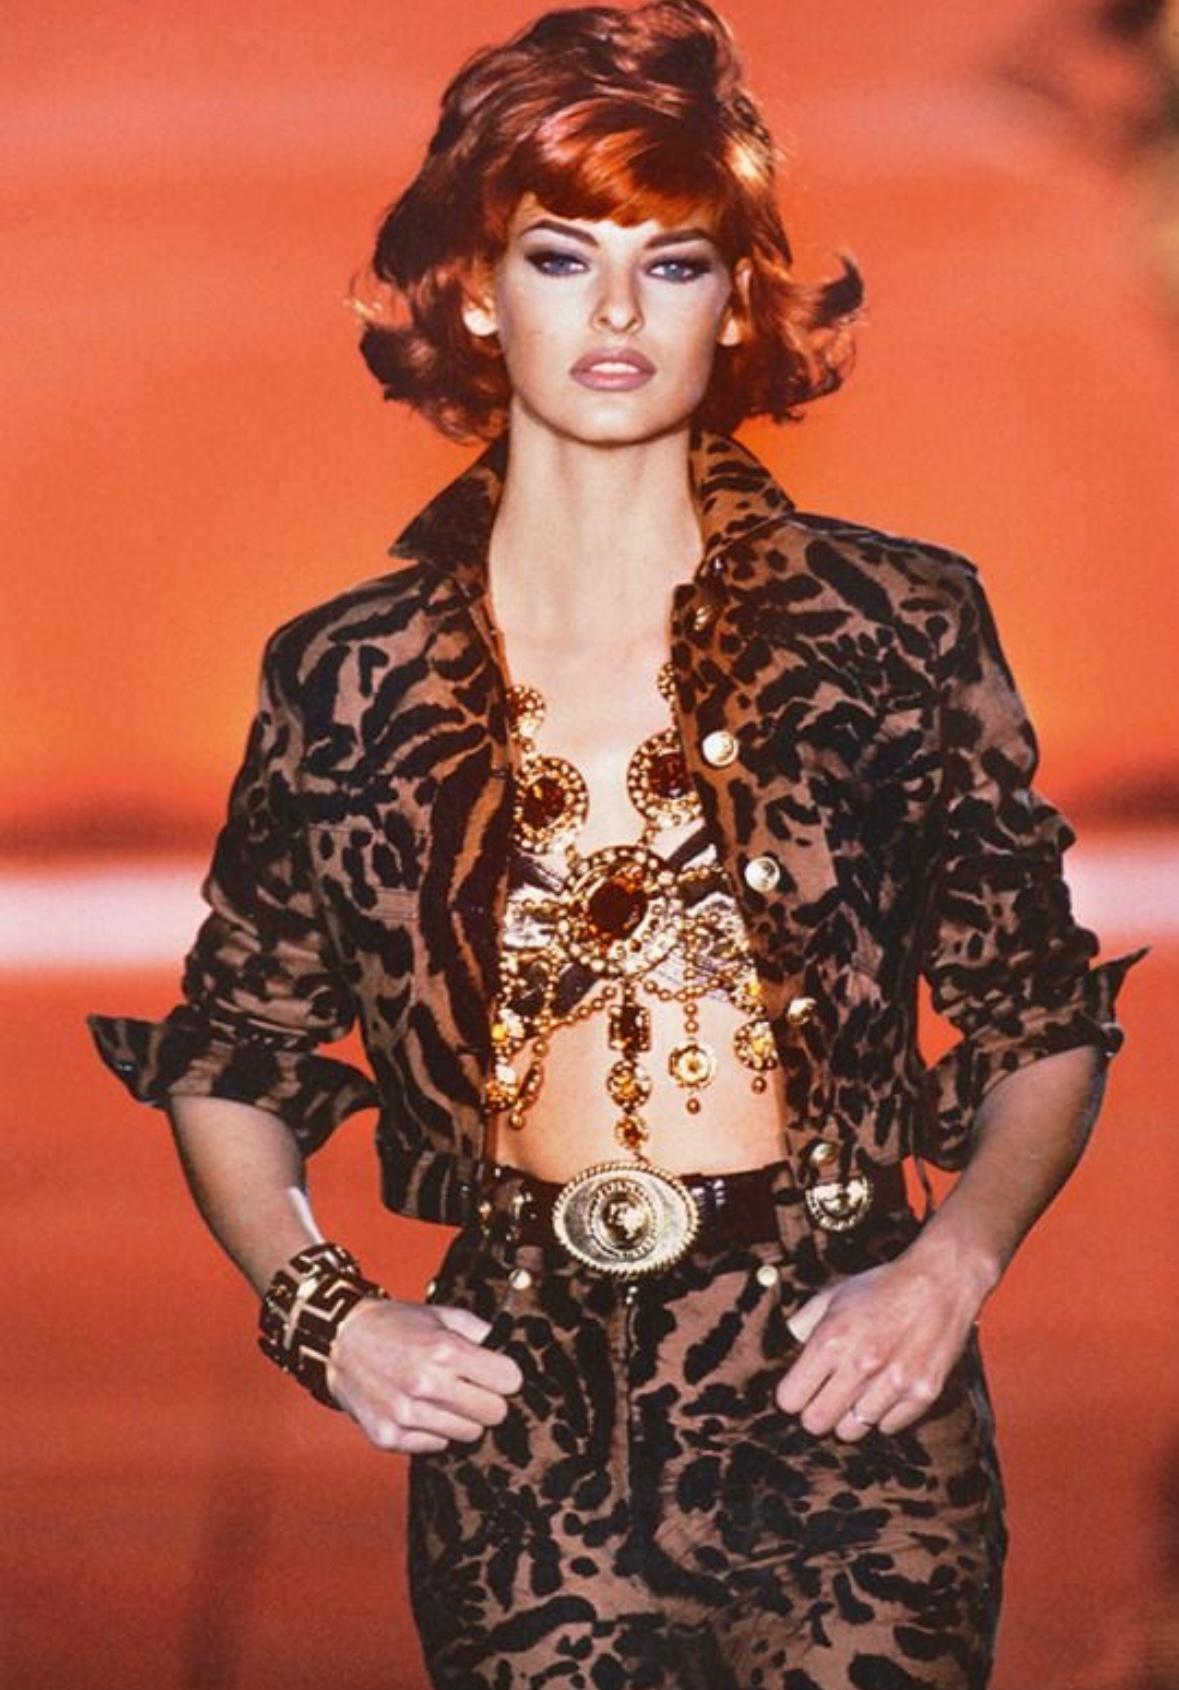 Presenting a fabulous brown Gianni Versace cropped jacket, designed by Gianni Versace. From the Spring/Summer 1992 collection, this jacket debuted on the season's runway as part of look 19, modeled by Linda Evangelista. Covered in a distinctive